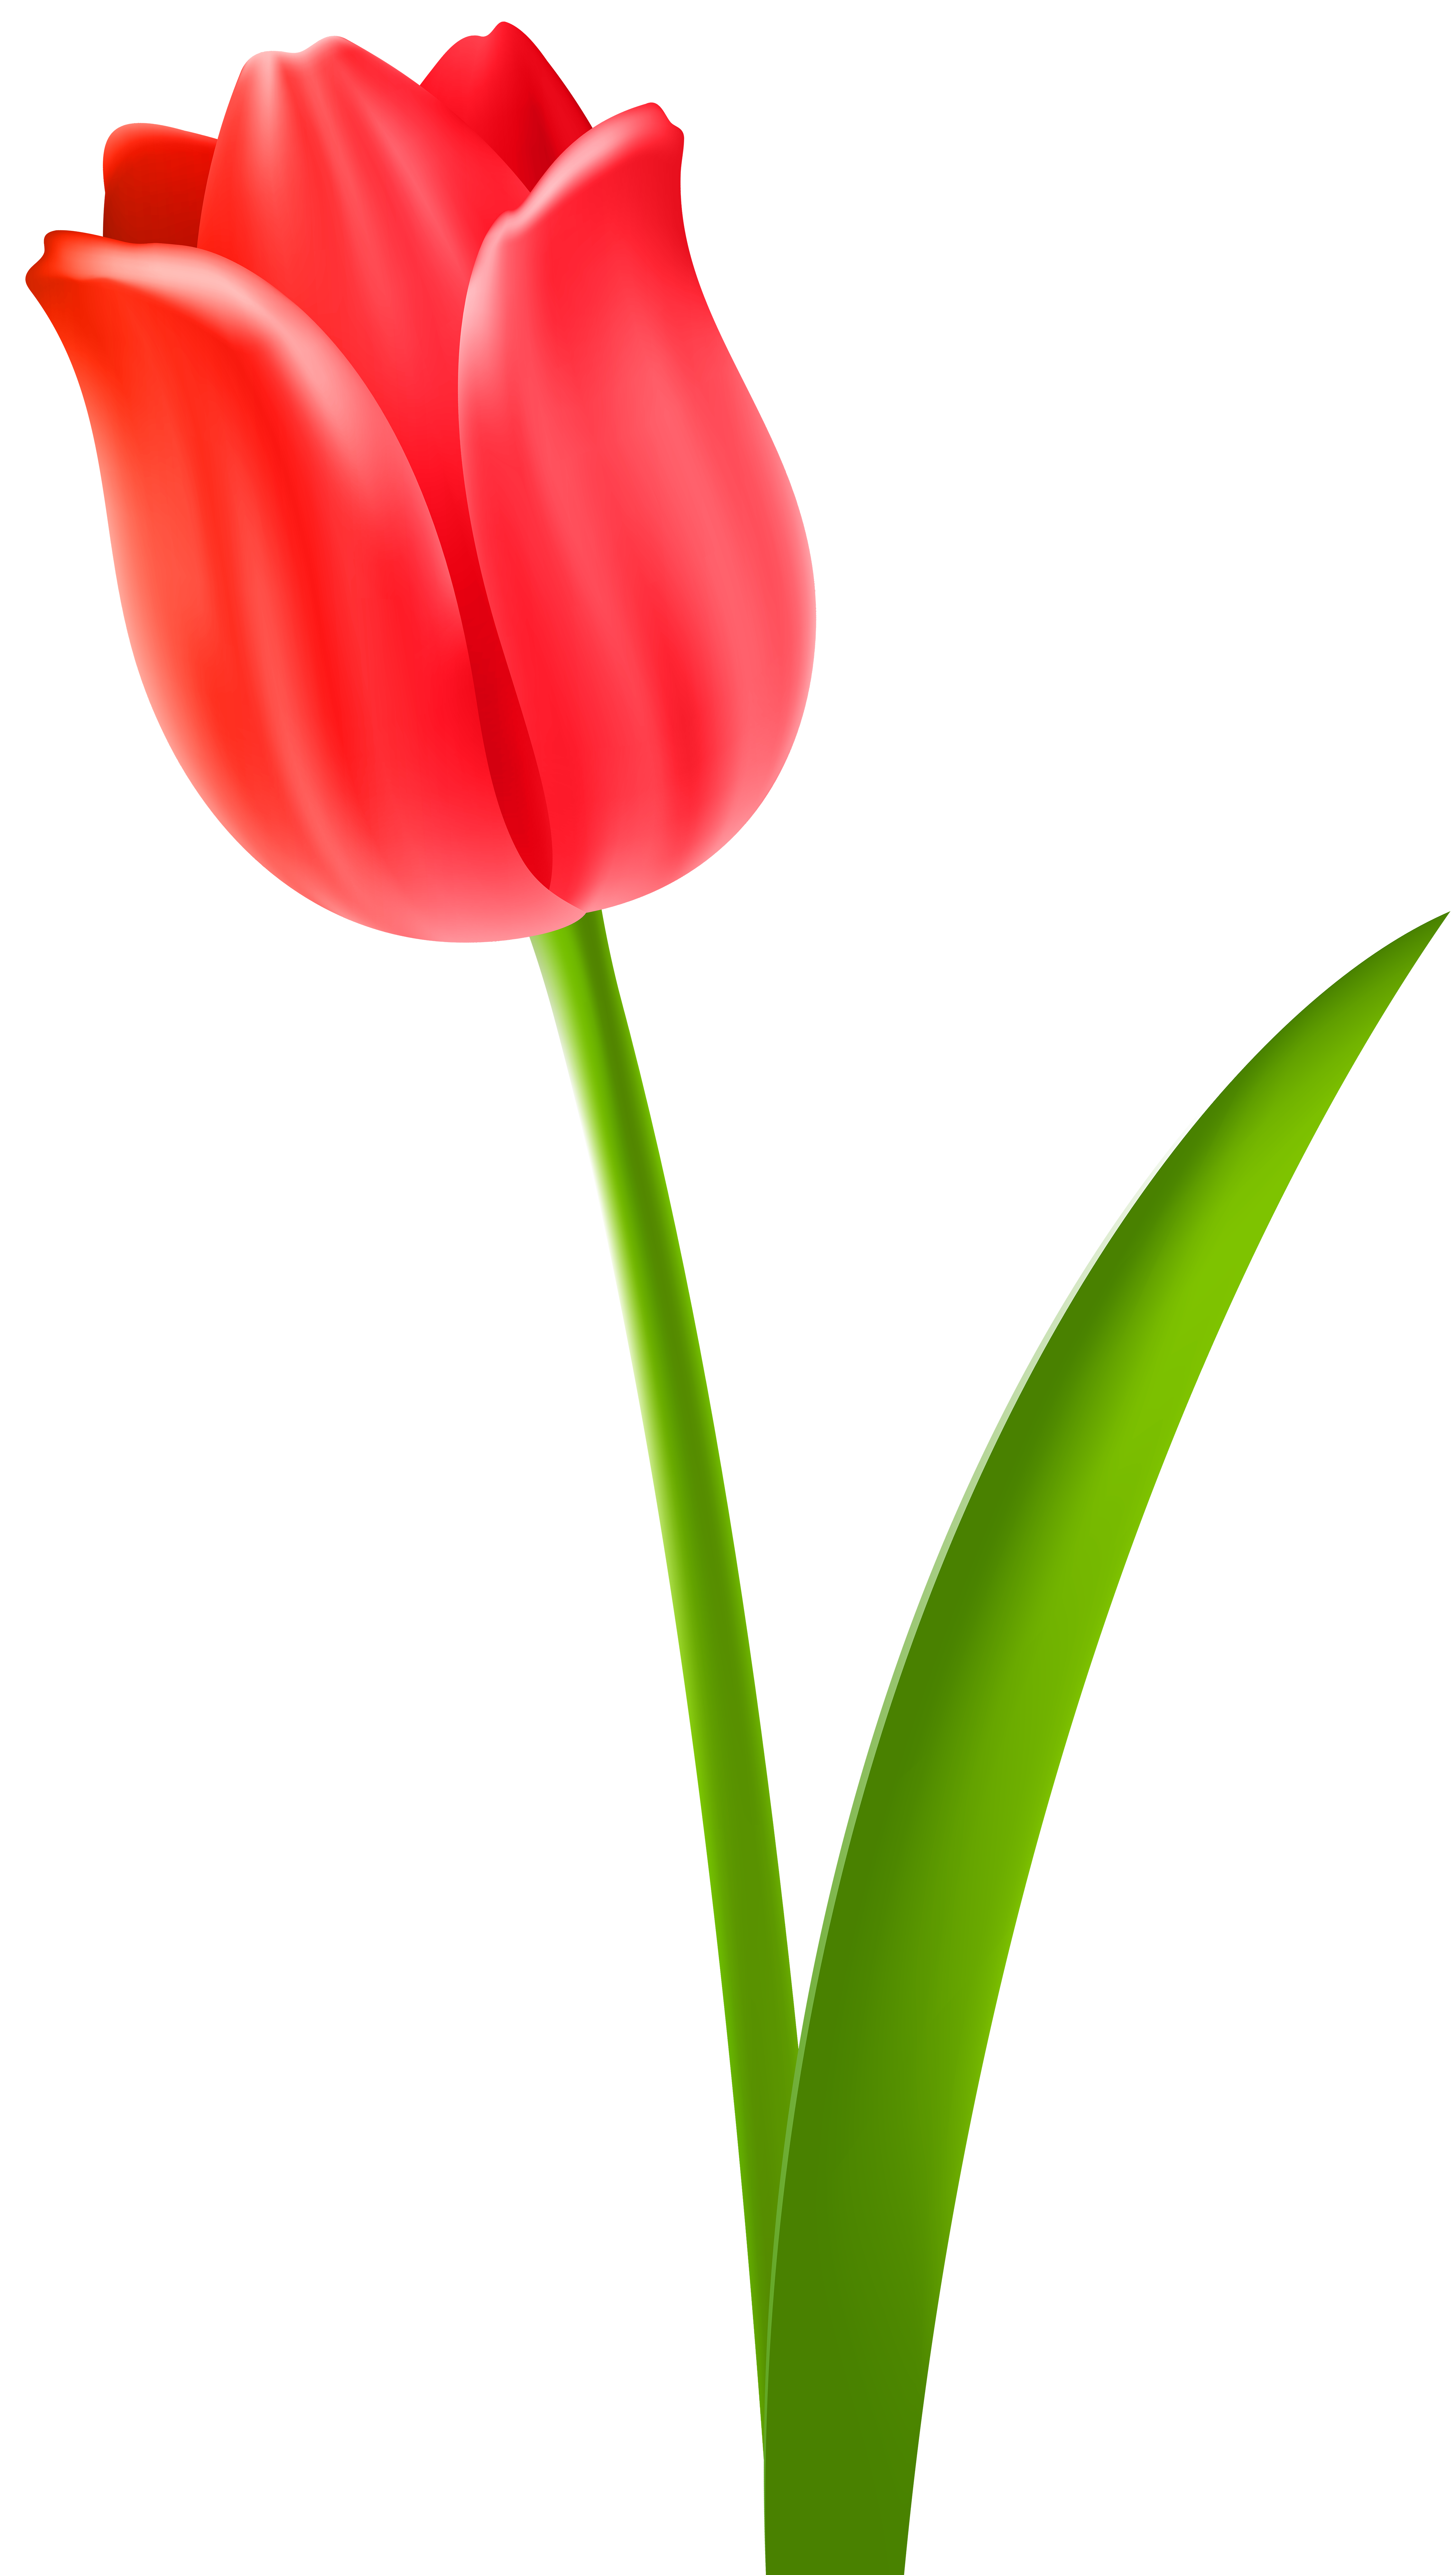 Red Tulip Transparent Clip Art Image | Gallery Yopriceville - High ...